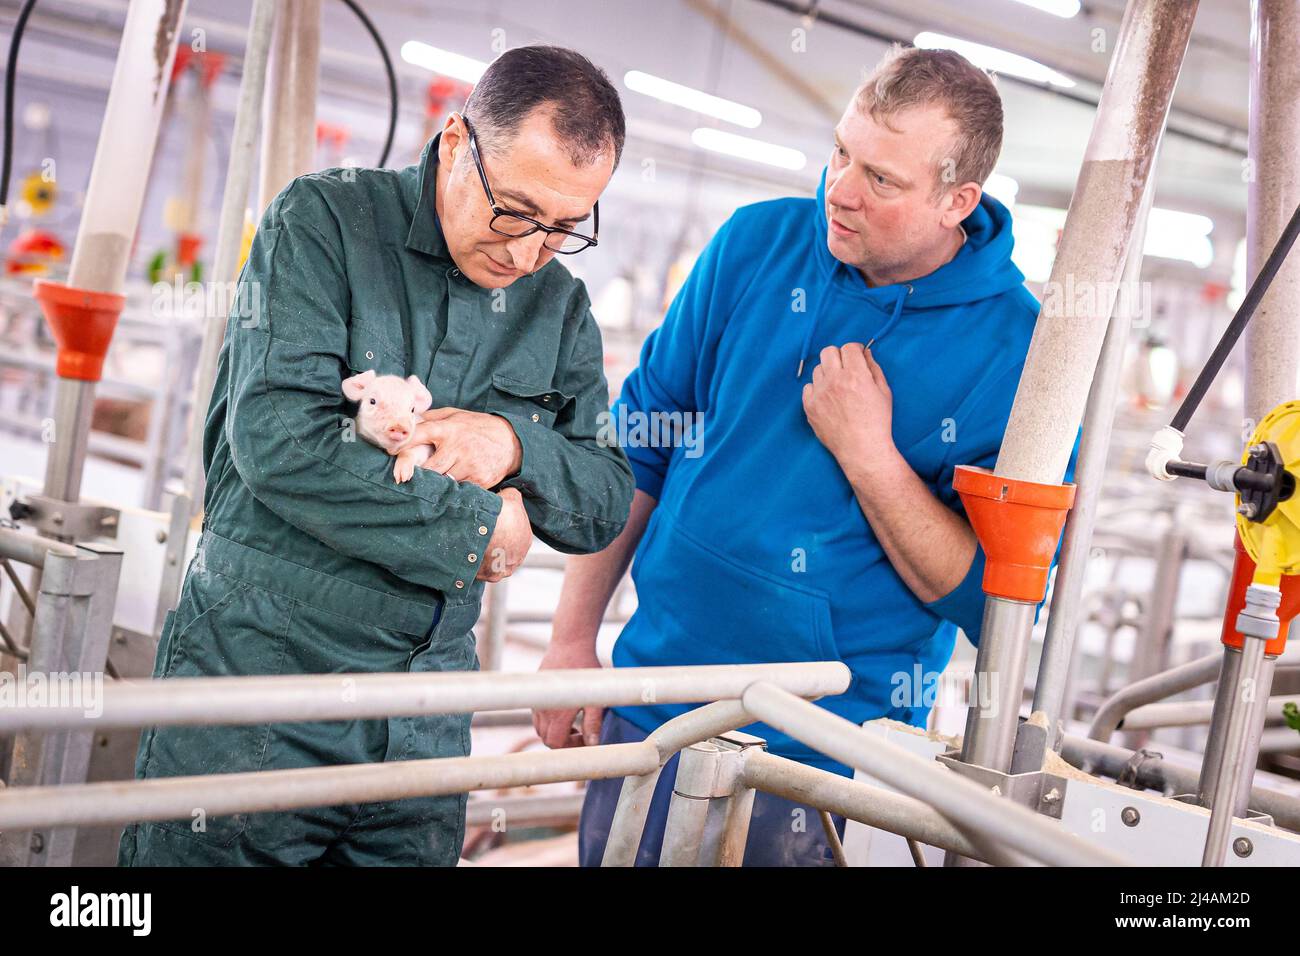 Bergen, Germany. 13th Apr, 2022. Cem Özdemir (l, Bündnis 90/Die Grünen),  Federal Minister of Food and Agriculture, talks to Jan-Hendrik Hohls,  farmer, while holding a piglet in his hands during his visit